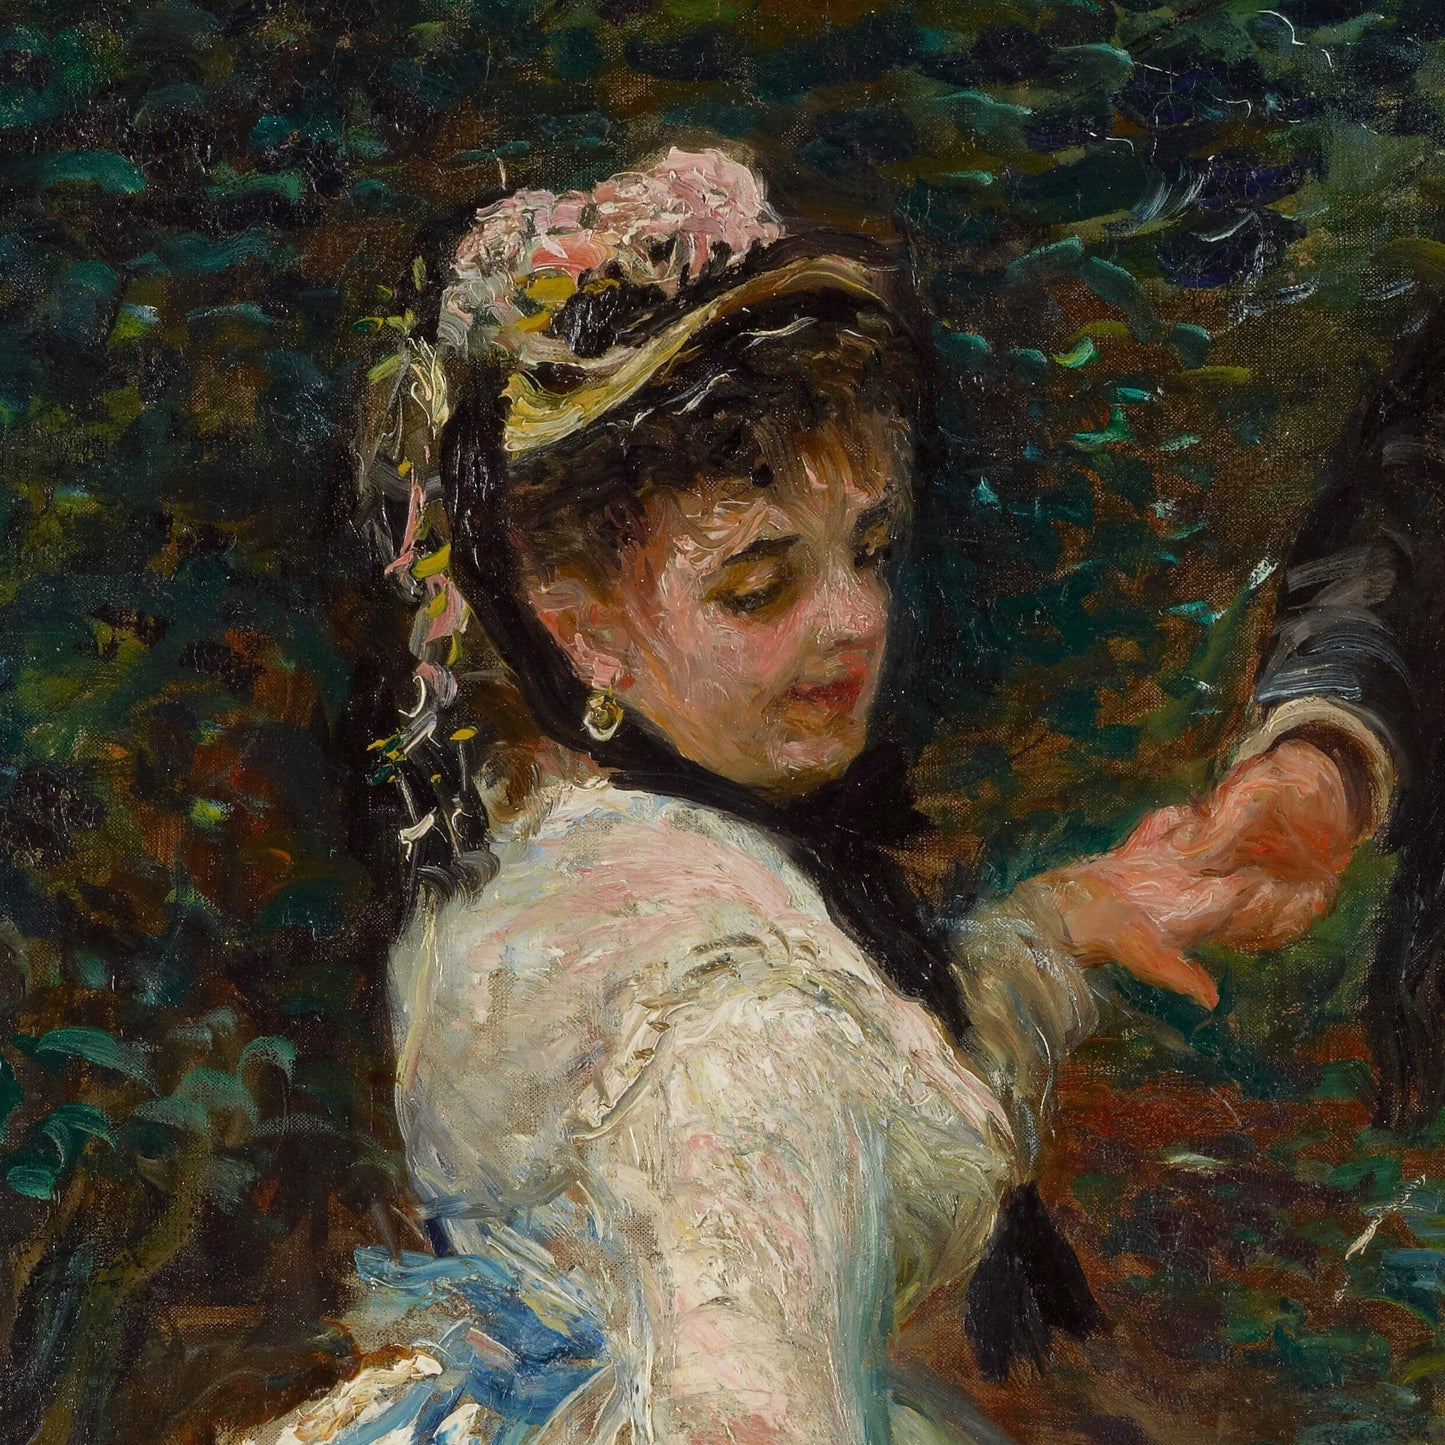 La Promenade by Pierre Auguste Renoir, 3d Printed with texture and brush strokes looks like original oil-painting, code:050